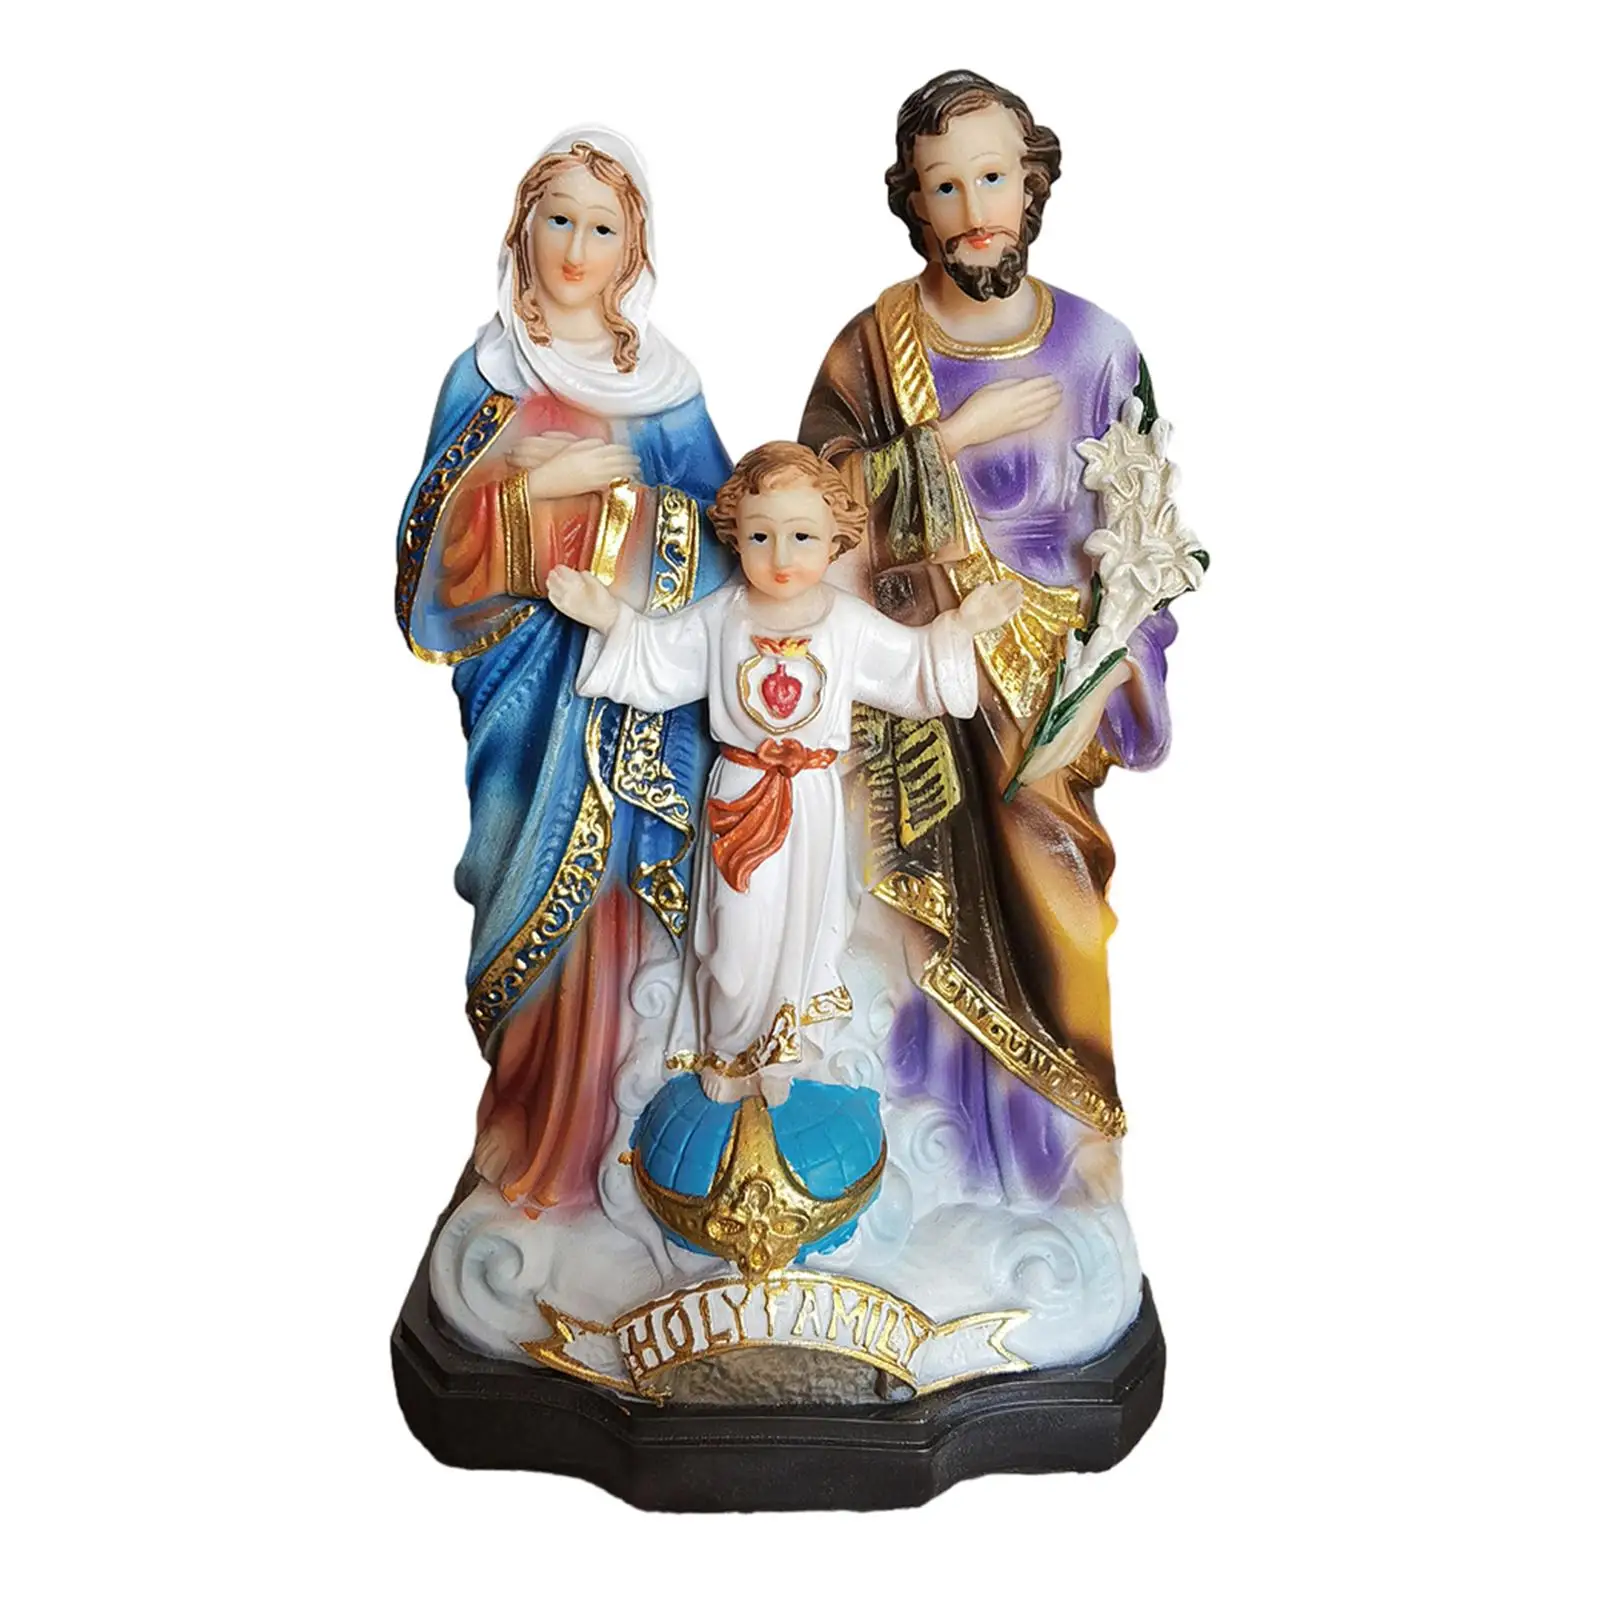 Holy Family with Child Figure, Religious Sculpture Resin Religious Gift Religious Holy Family Figures for Tabletop